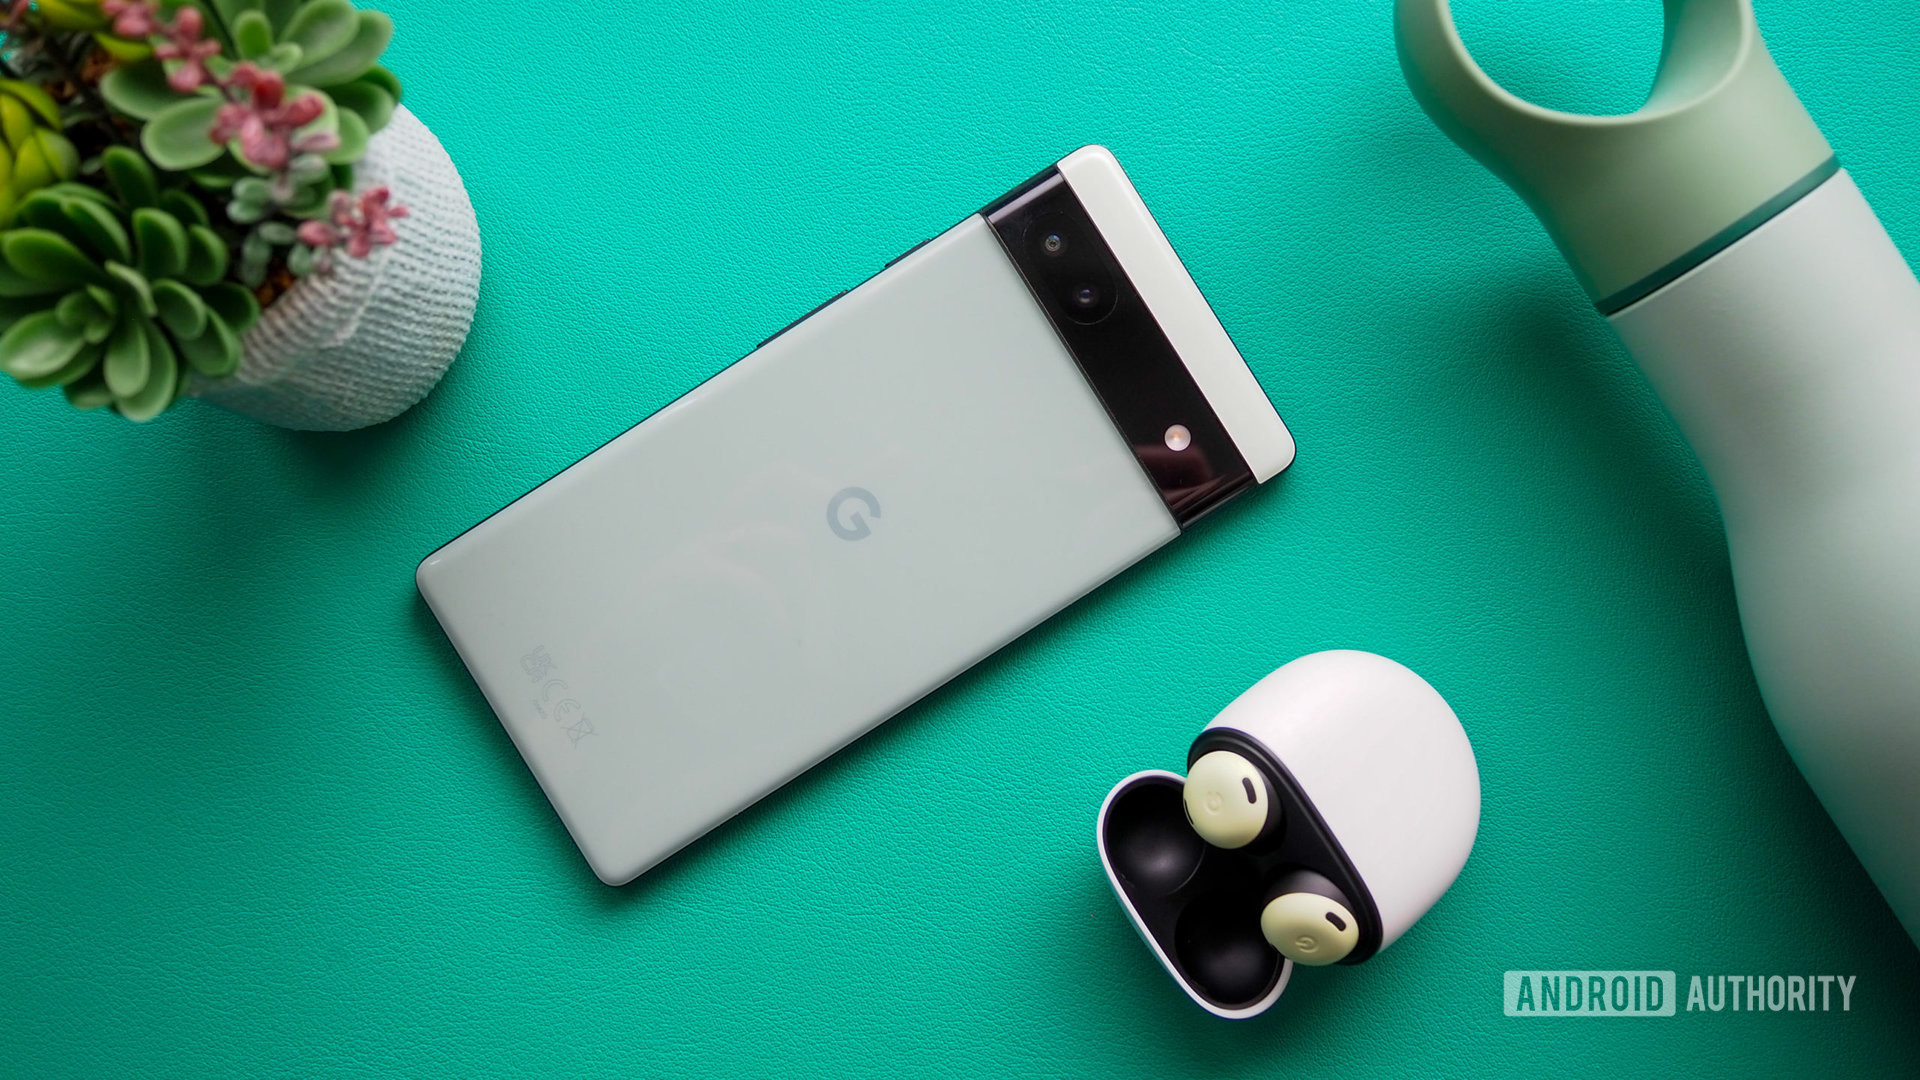 Google Pixel 6a in Sage color, seen from the back, next to Pixel Buds Pro, on a turquoise background